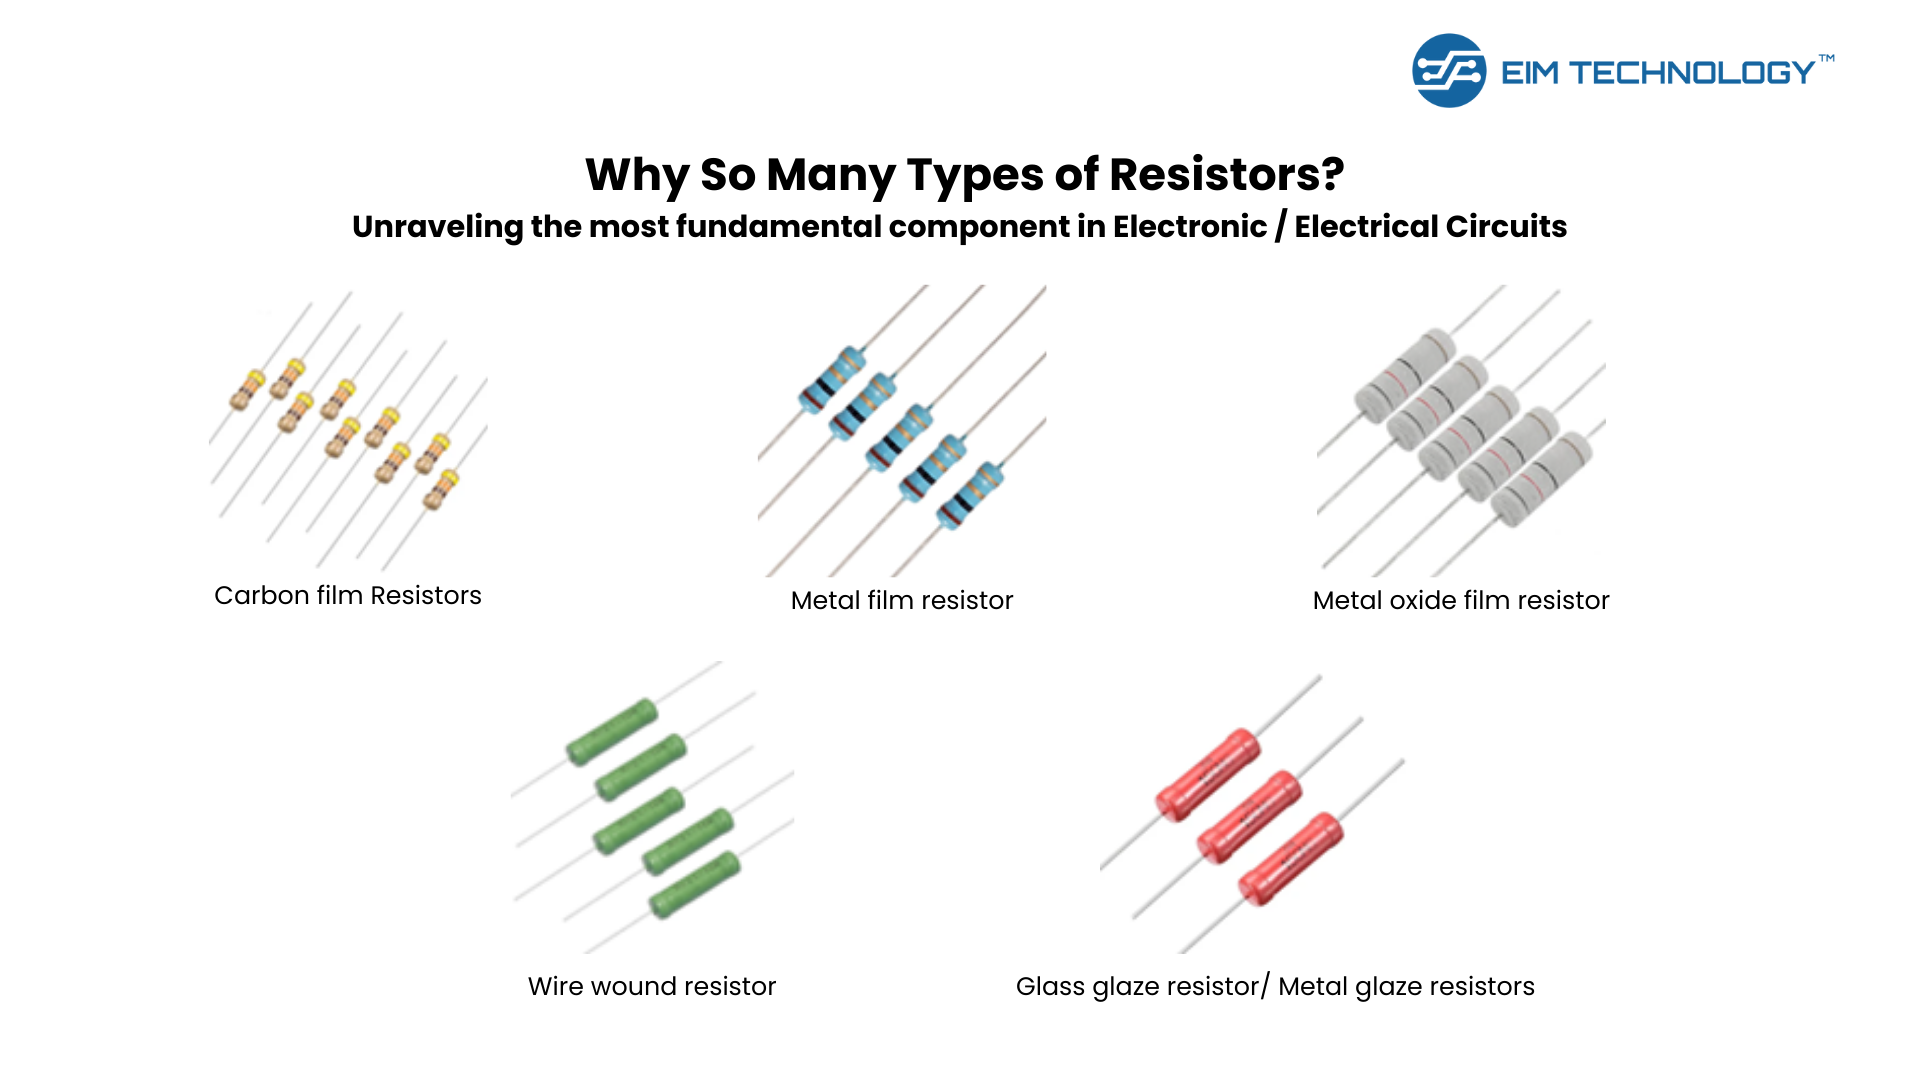 Why So Many Types of Resistors? Unraveling the most fundamental component in Electronic / Electrical Circuits